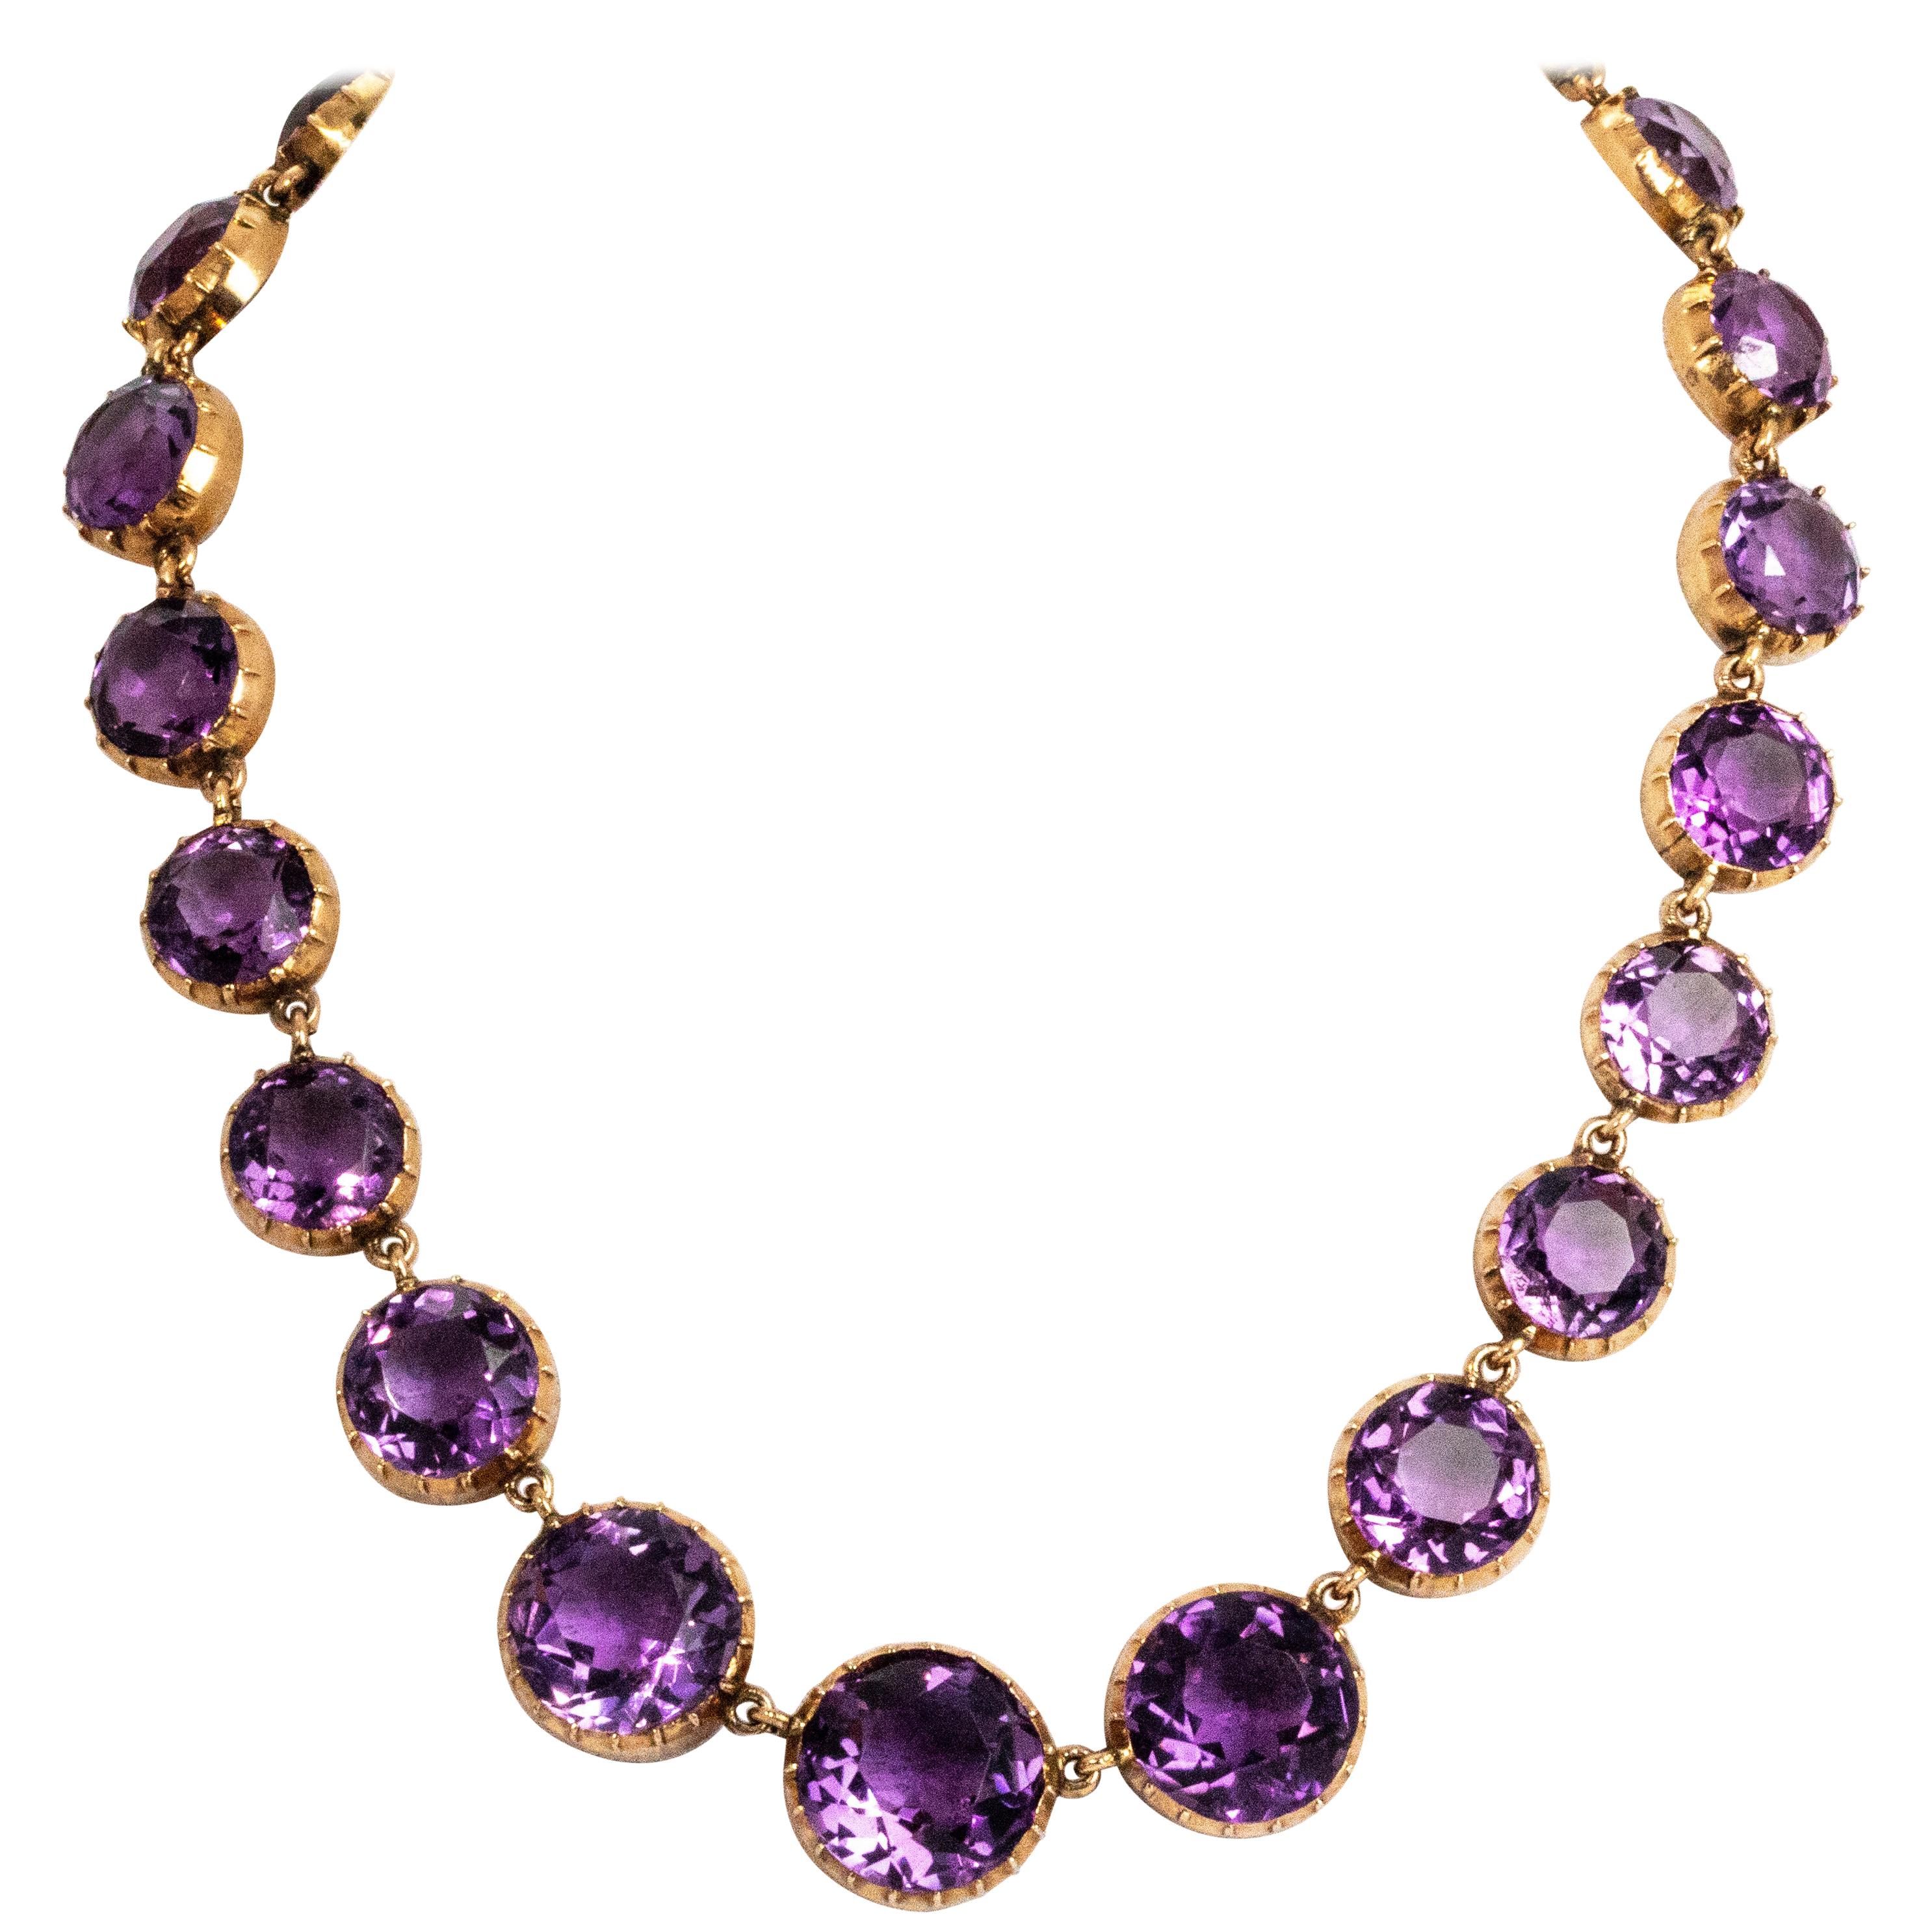 Victorian 9 Carat Gold Amethyst Riviere Necklace